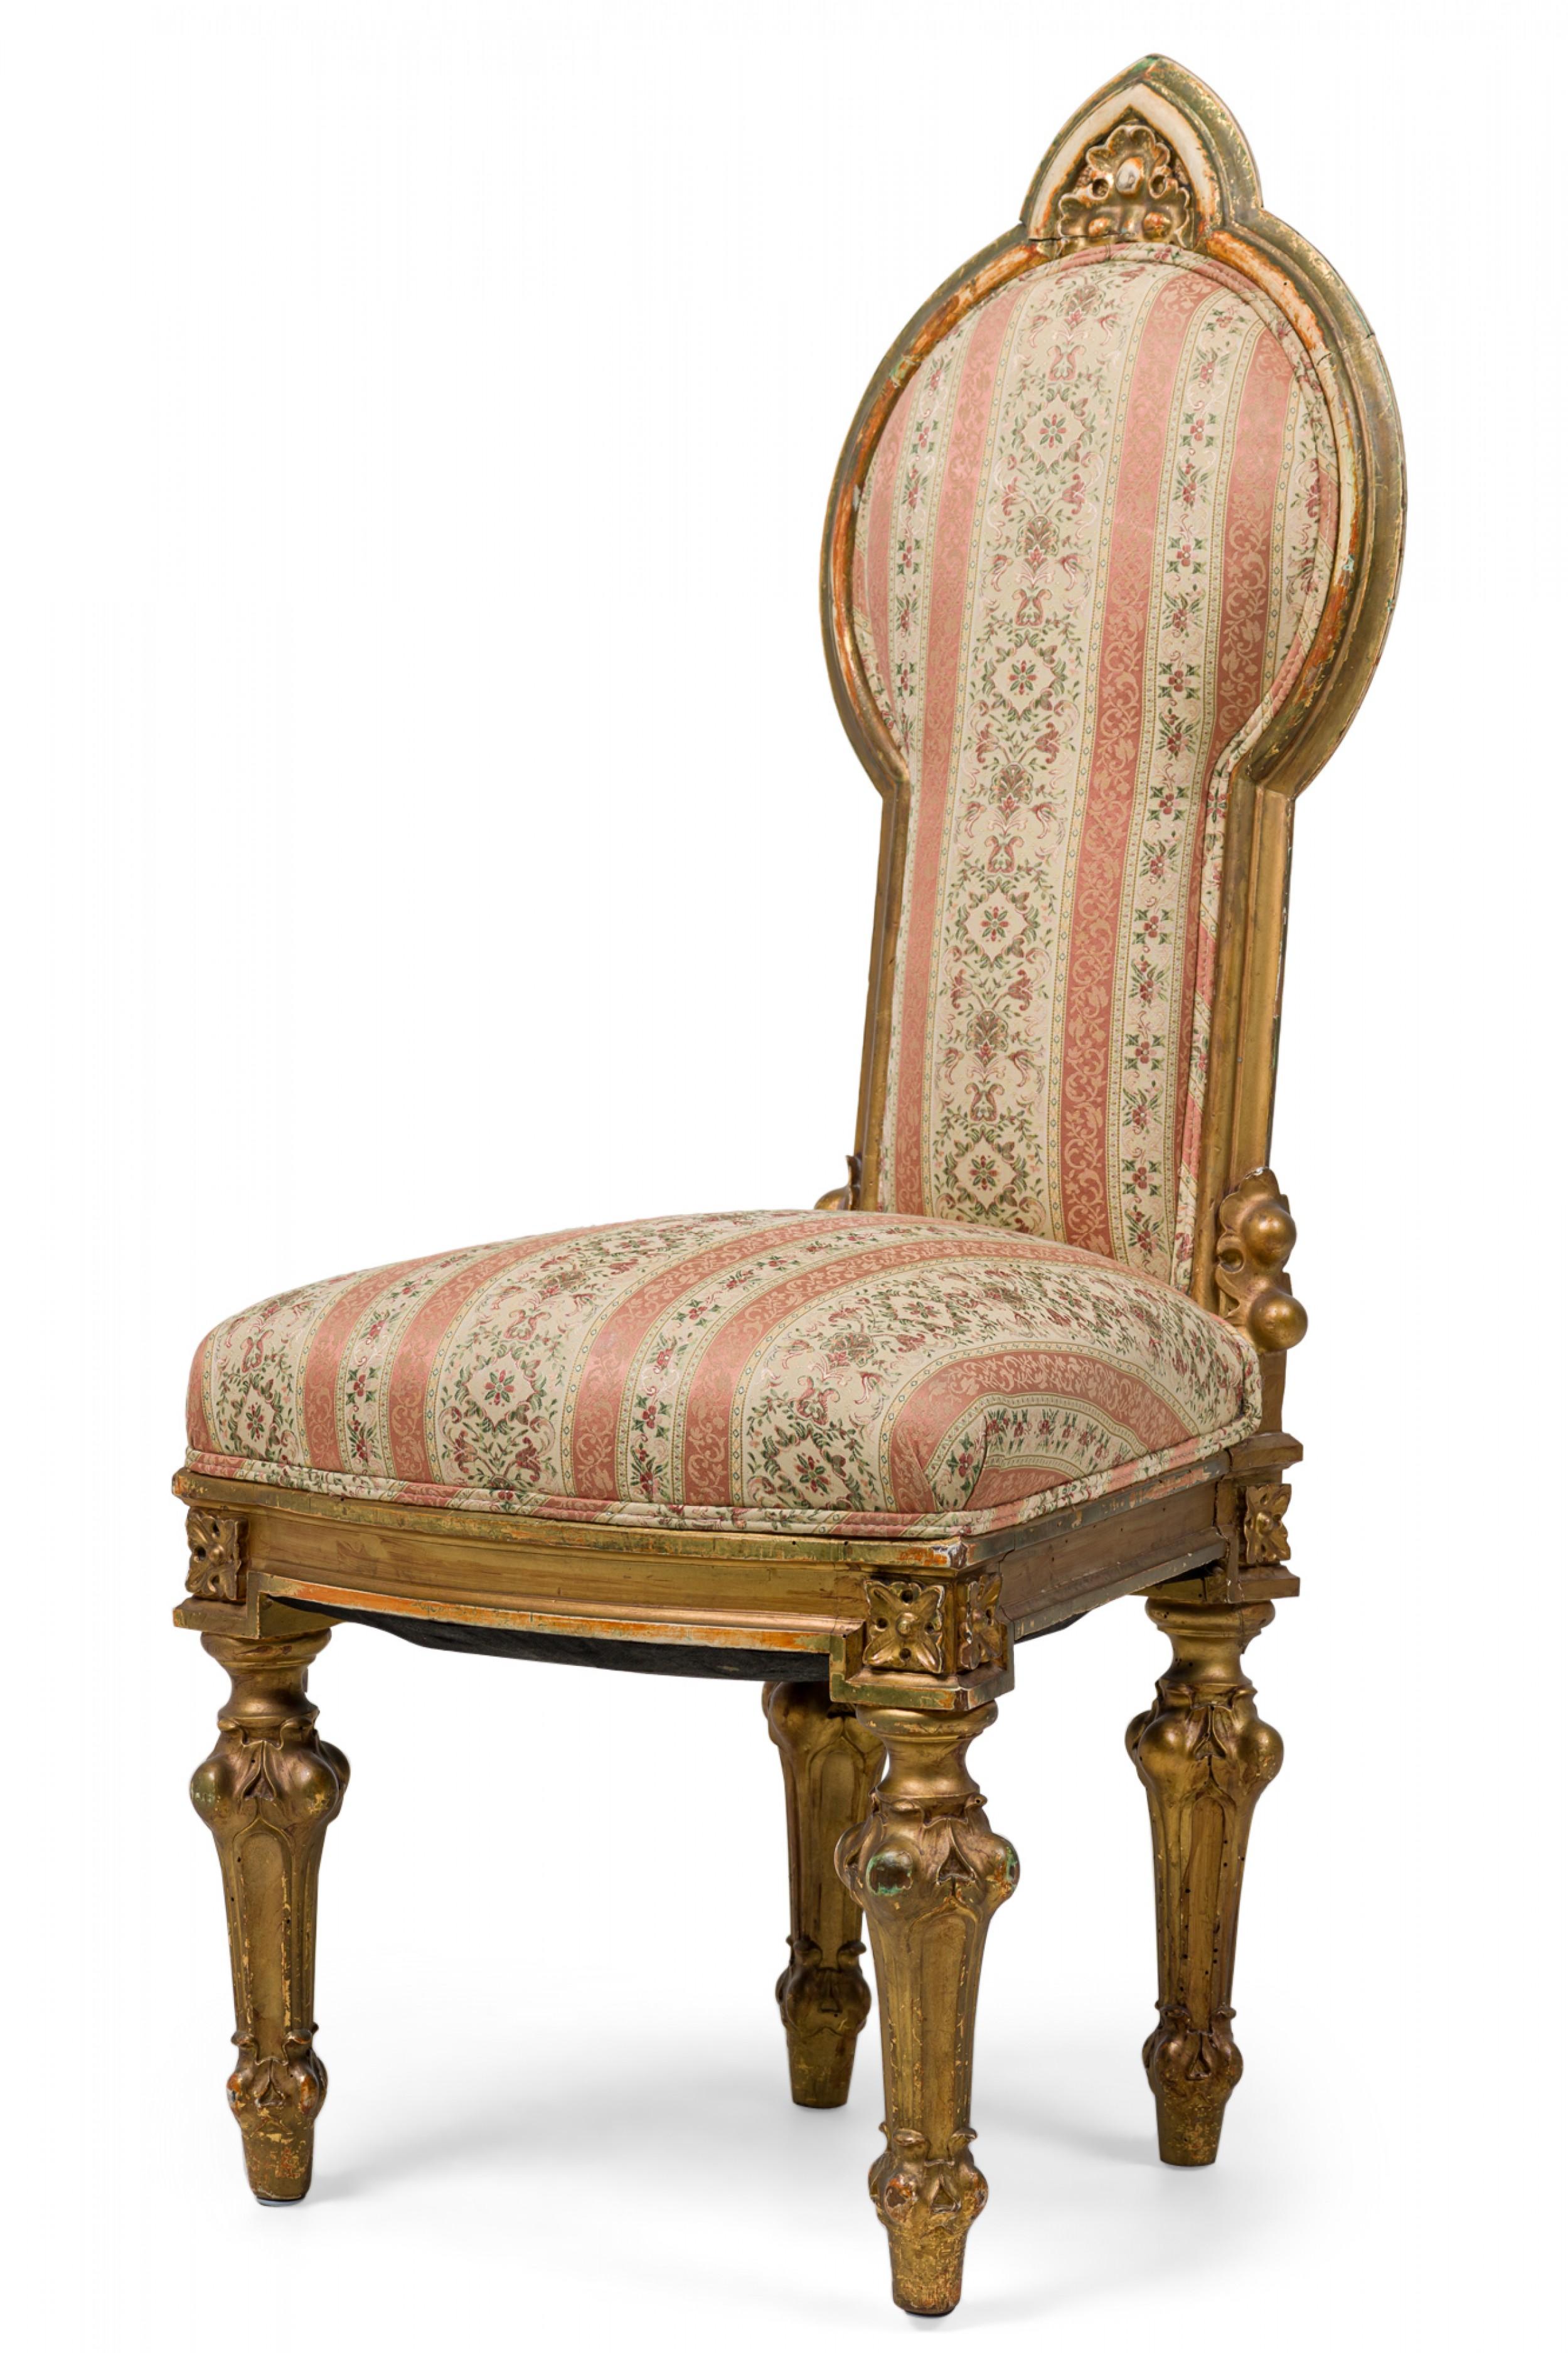 Italian Neo-Classic (18th Century) giltwood dining / side chair featuring a compound shaped oval back, carved foliate crest, ornate painted frame with decorative embellishments, padded back and seat upholstered in a floral stripe pink and beige